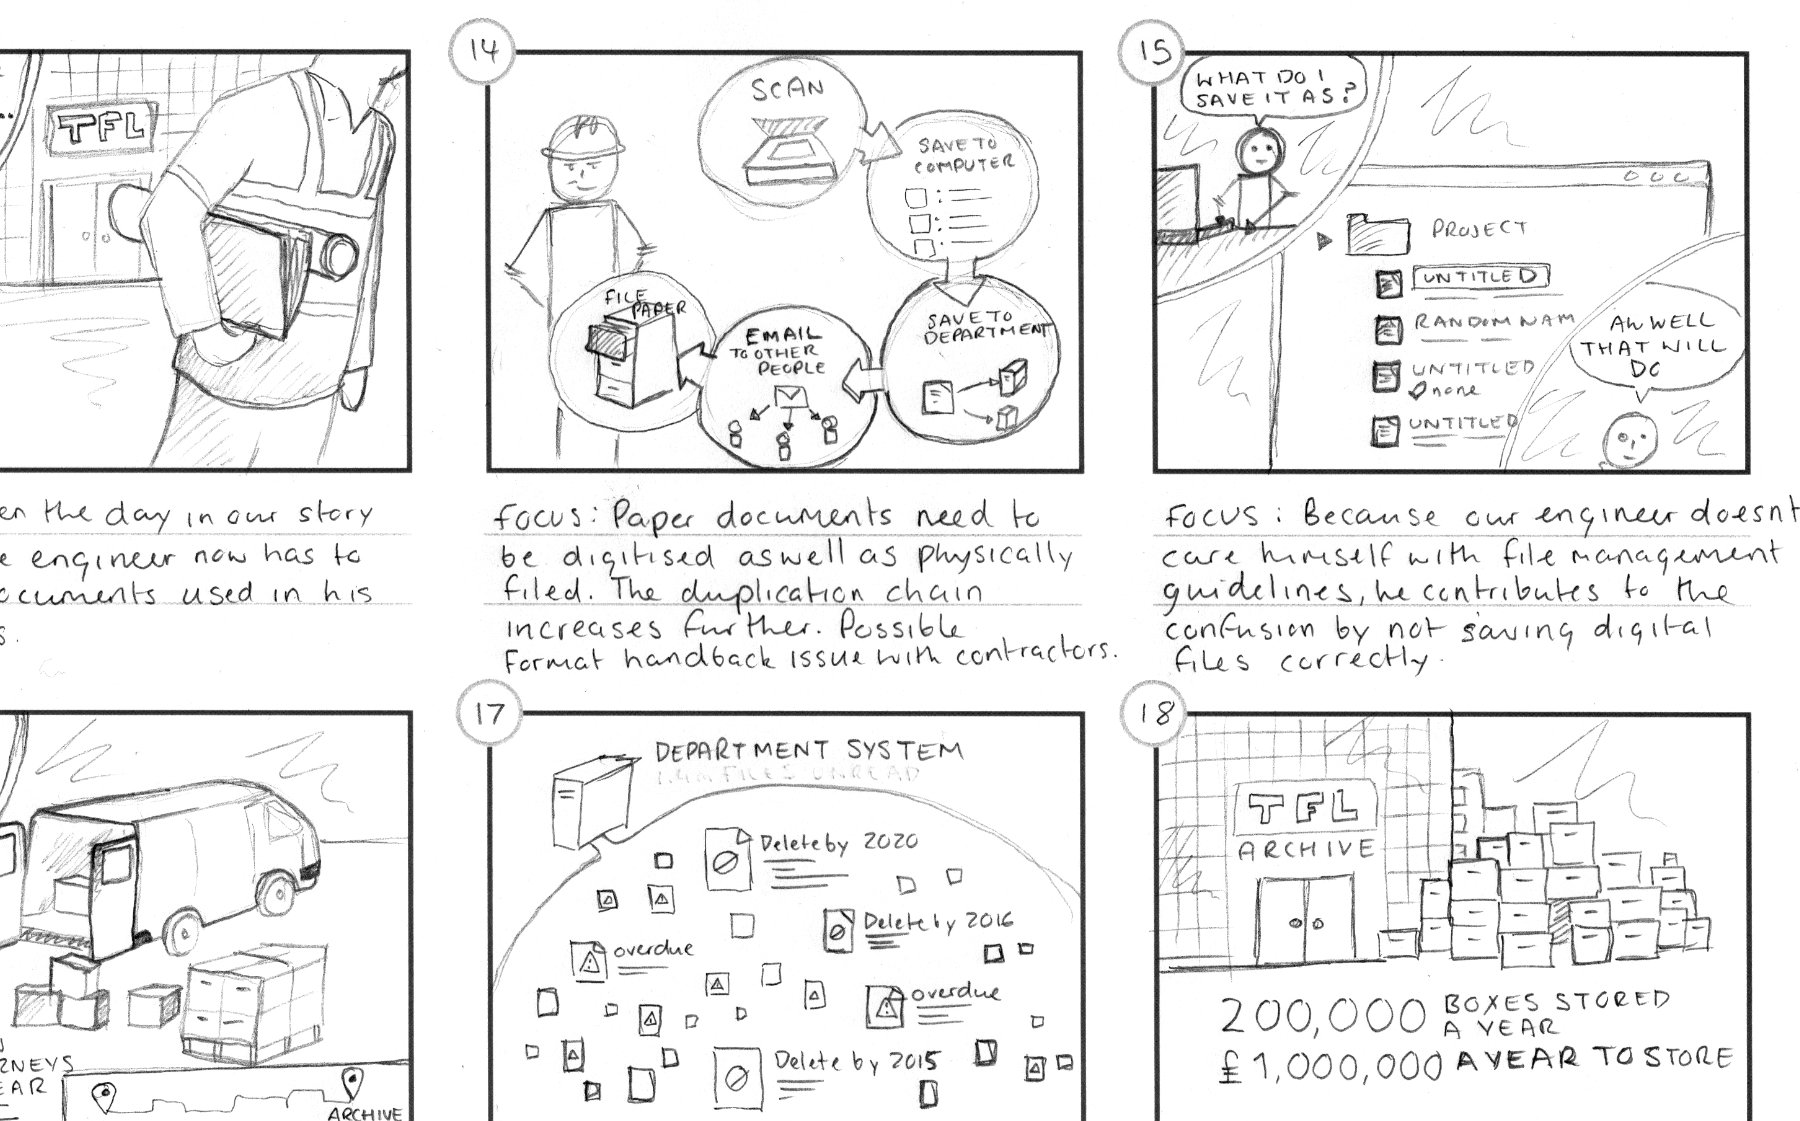 Image: [Fig 2] Sketching out user scenarios from research